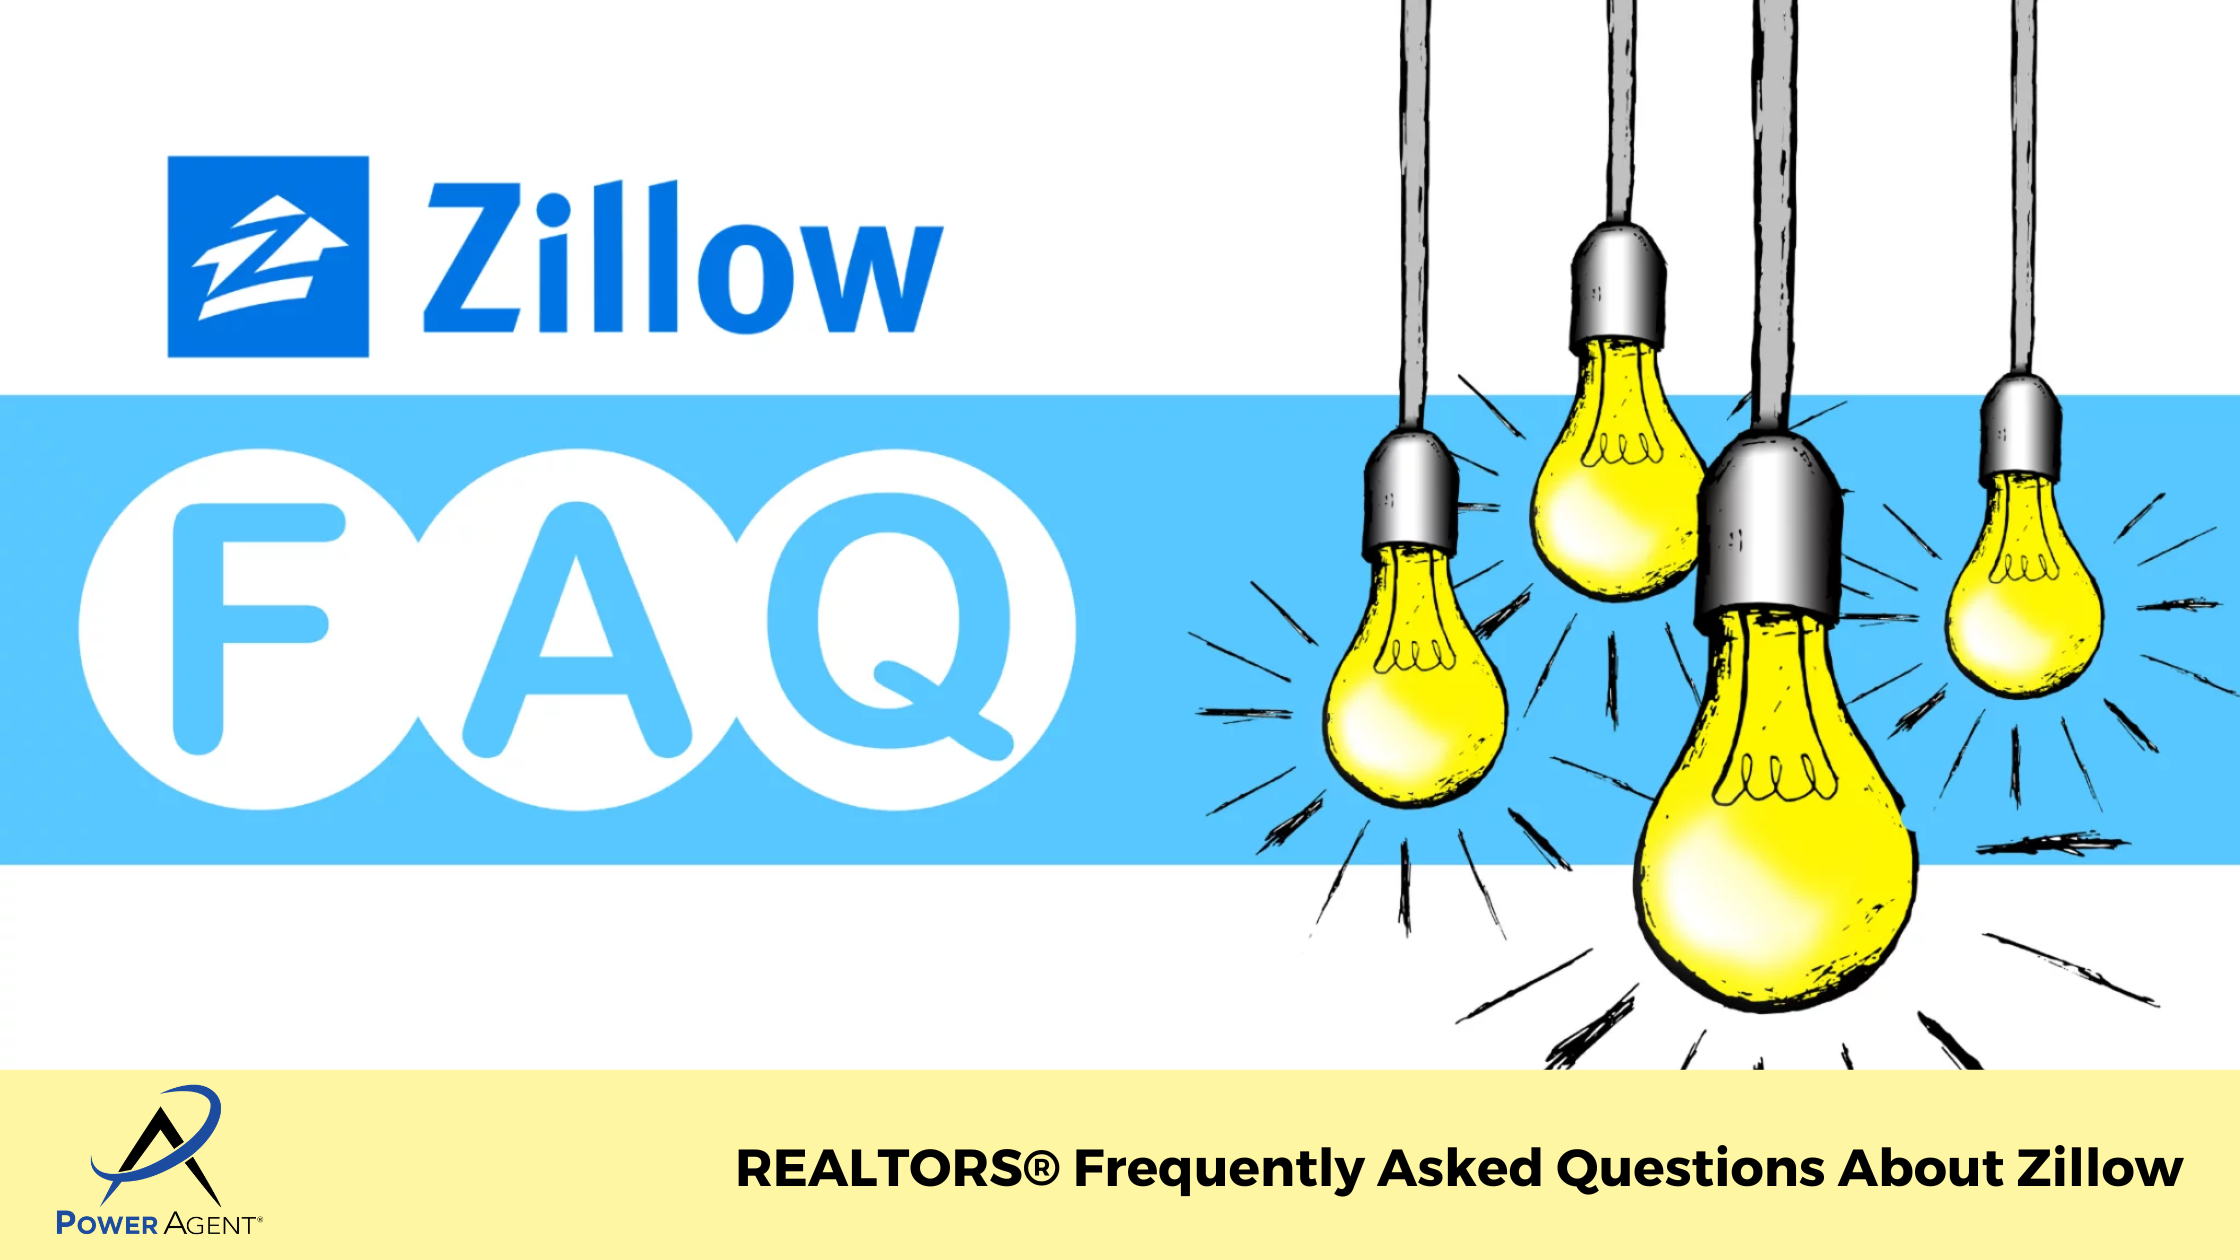 REALTORS® Frequently Asked Questions About Zillow